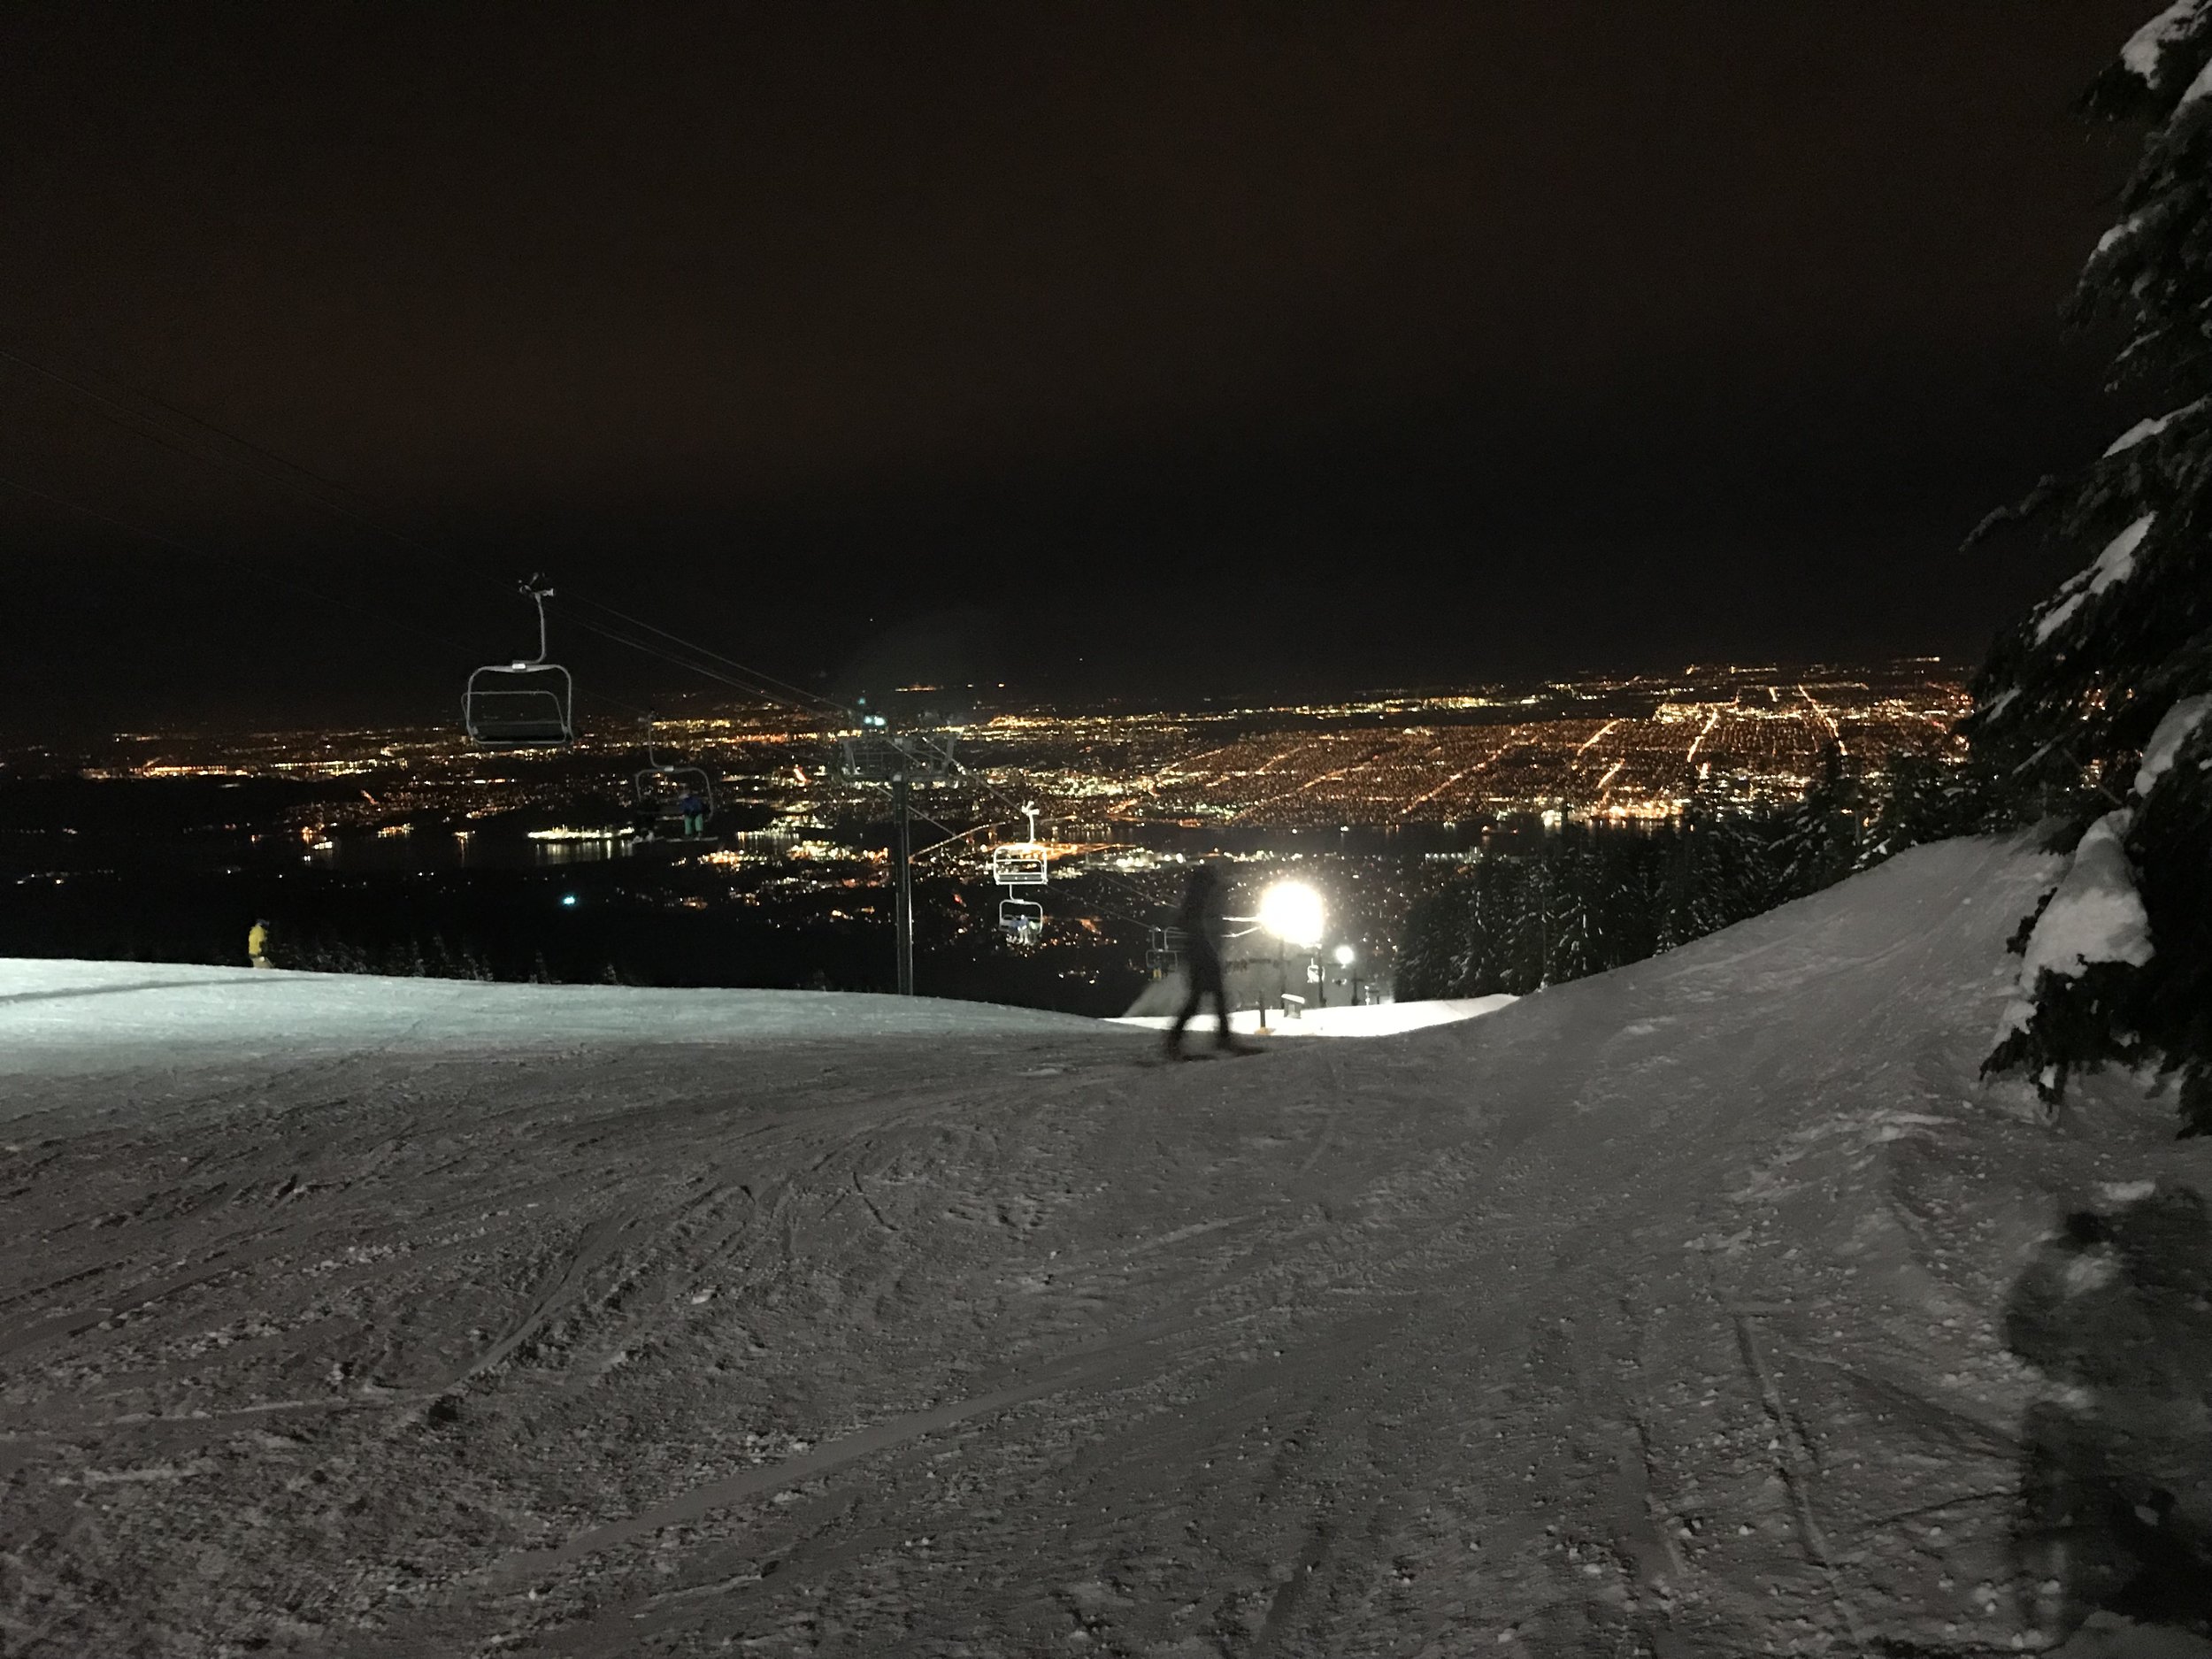 Grouse Mountain - Vancouver, BC